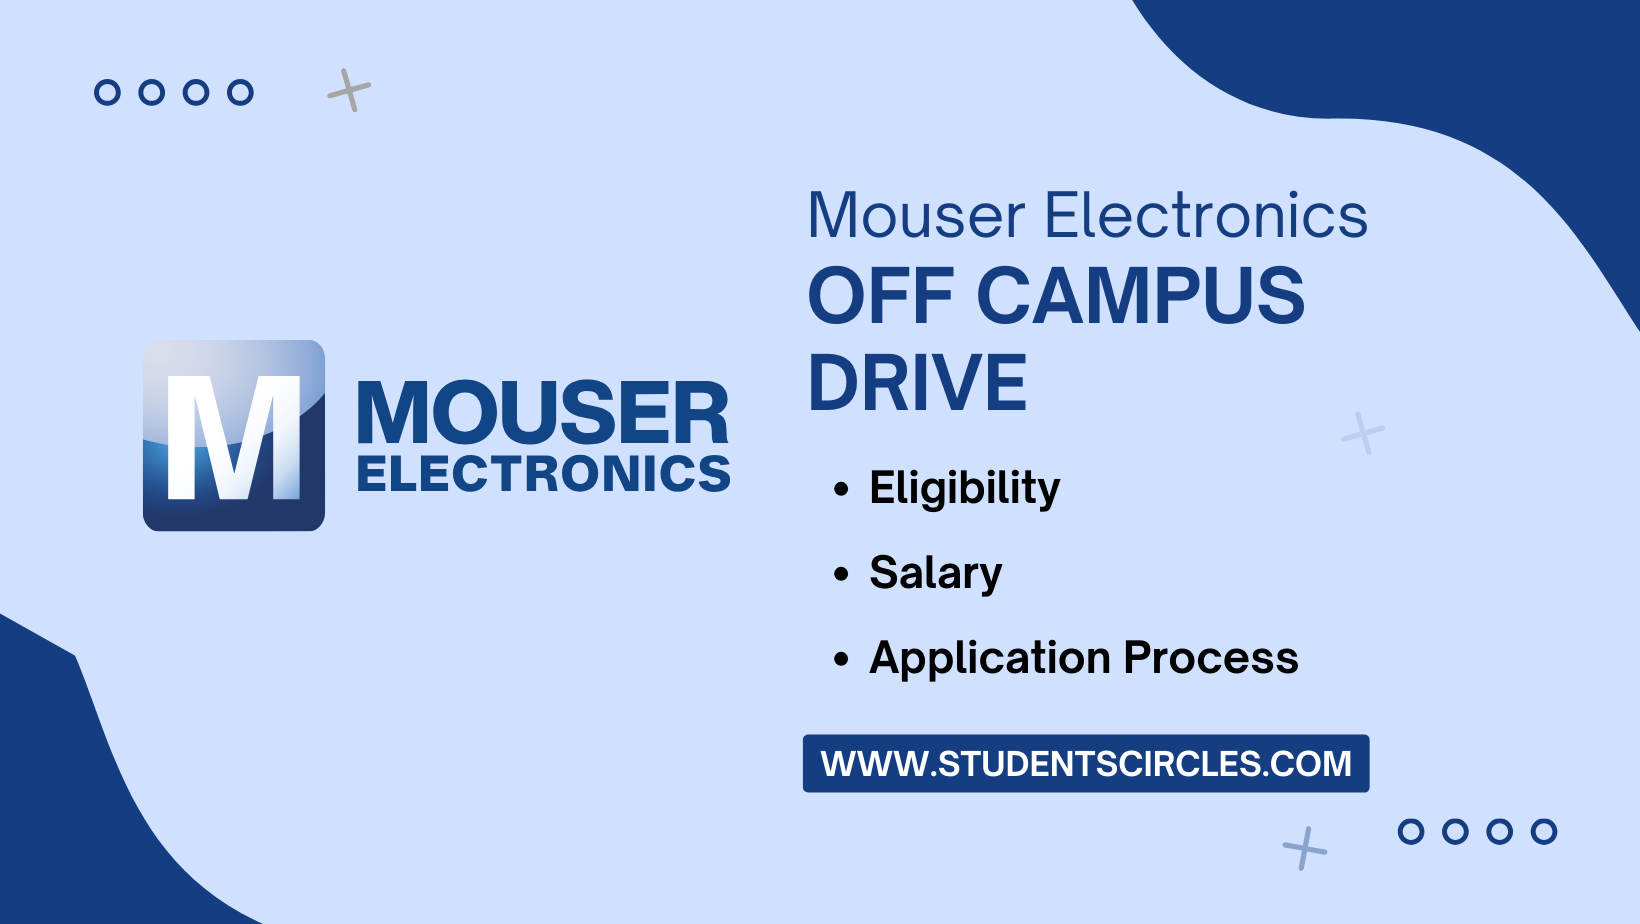 Mouser Electronics Off Campus Drive